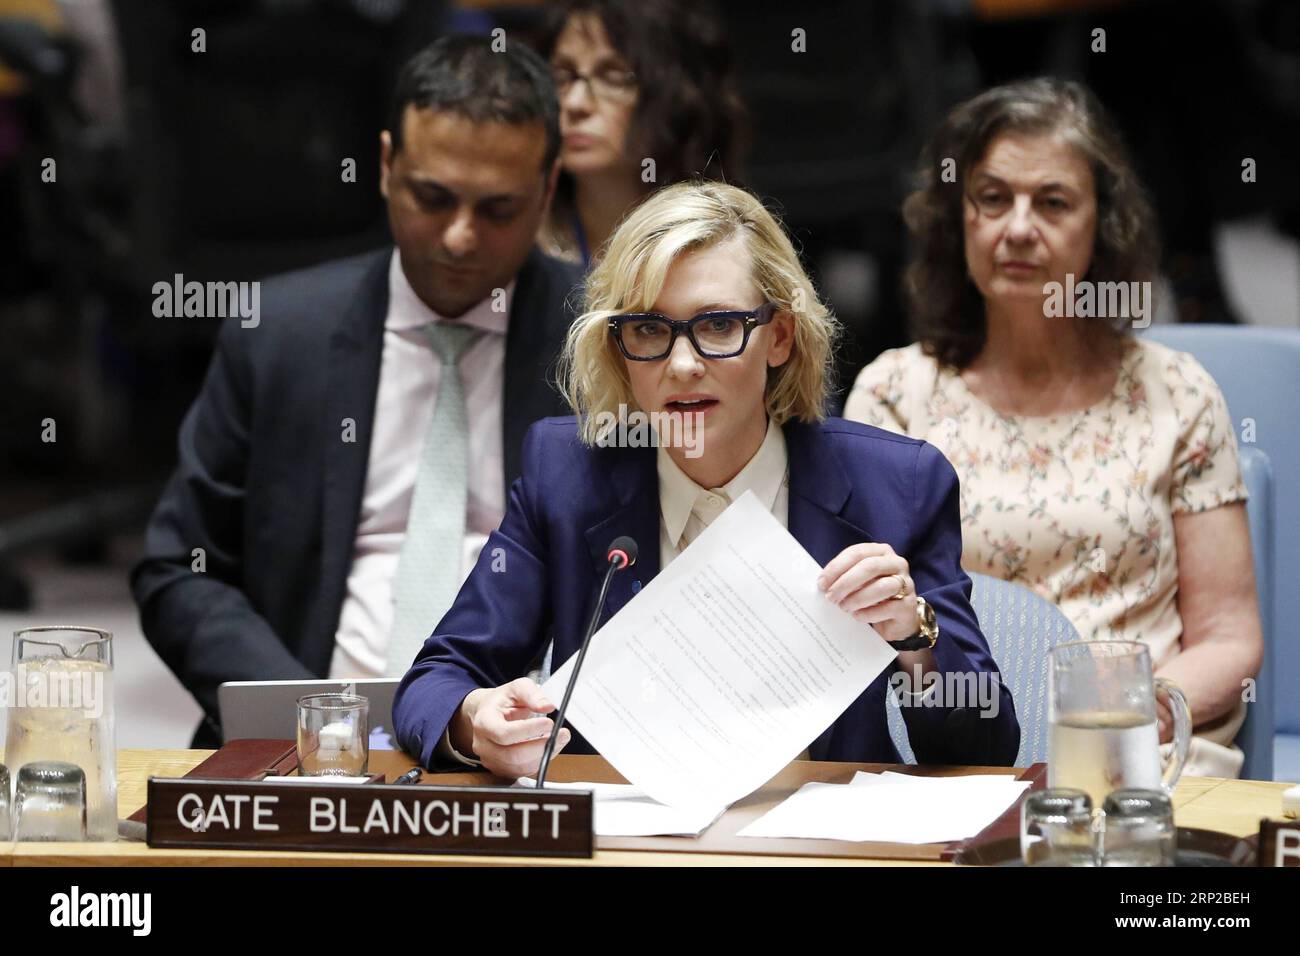 (180828) -- UNITED NATIONS, Aug. 28, 2018 -- Cate Blanchett (front), United Nations Refugee Agency Goodwill Ambassador, addresses the Security Council on the situation in Myanmar and the Rohingya refugee crisis, at the UN headquarters in New York, Aug. 28, 2018. Cate Blanchett on Tuesday asked for efforts to help Rohingya refugees in Bangladesh and to create the right conditions for their return to Myanmar. ) UN-SECURITY COUNCIL-MYANMAR-ROHINGYA CRISIS-CATE BLANCHETT LixMuzi PUBLICATIONxNOTxINxCHN Stock Photo